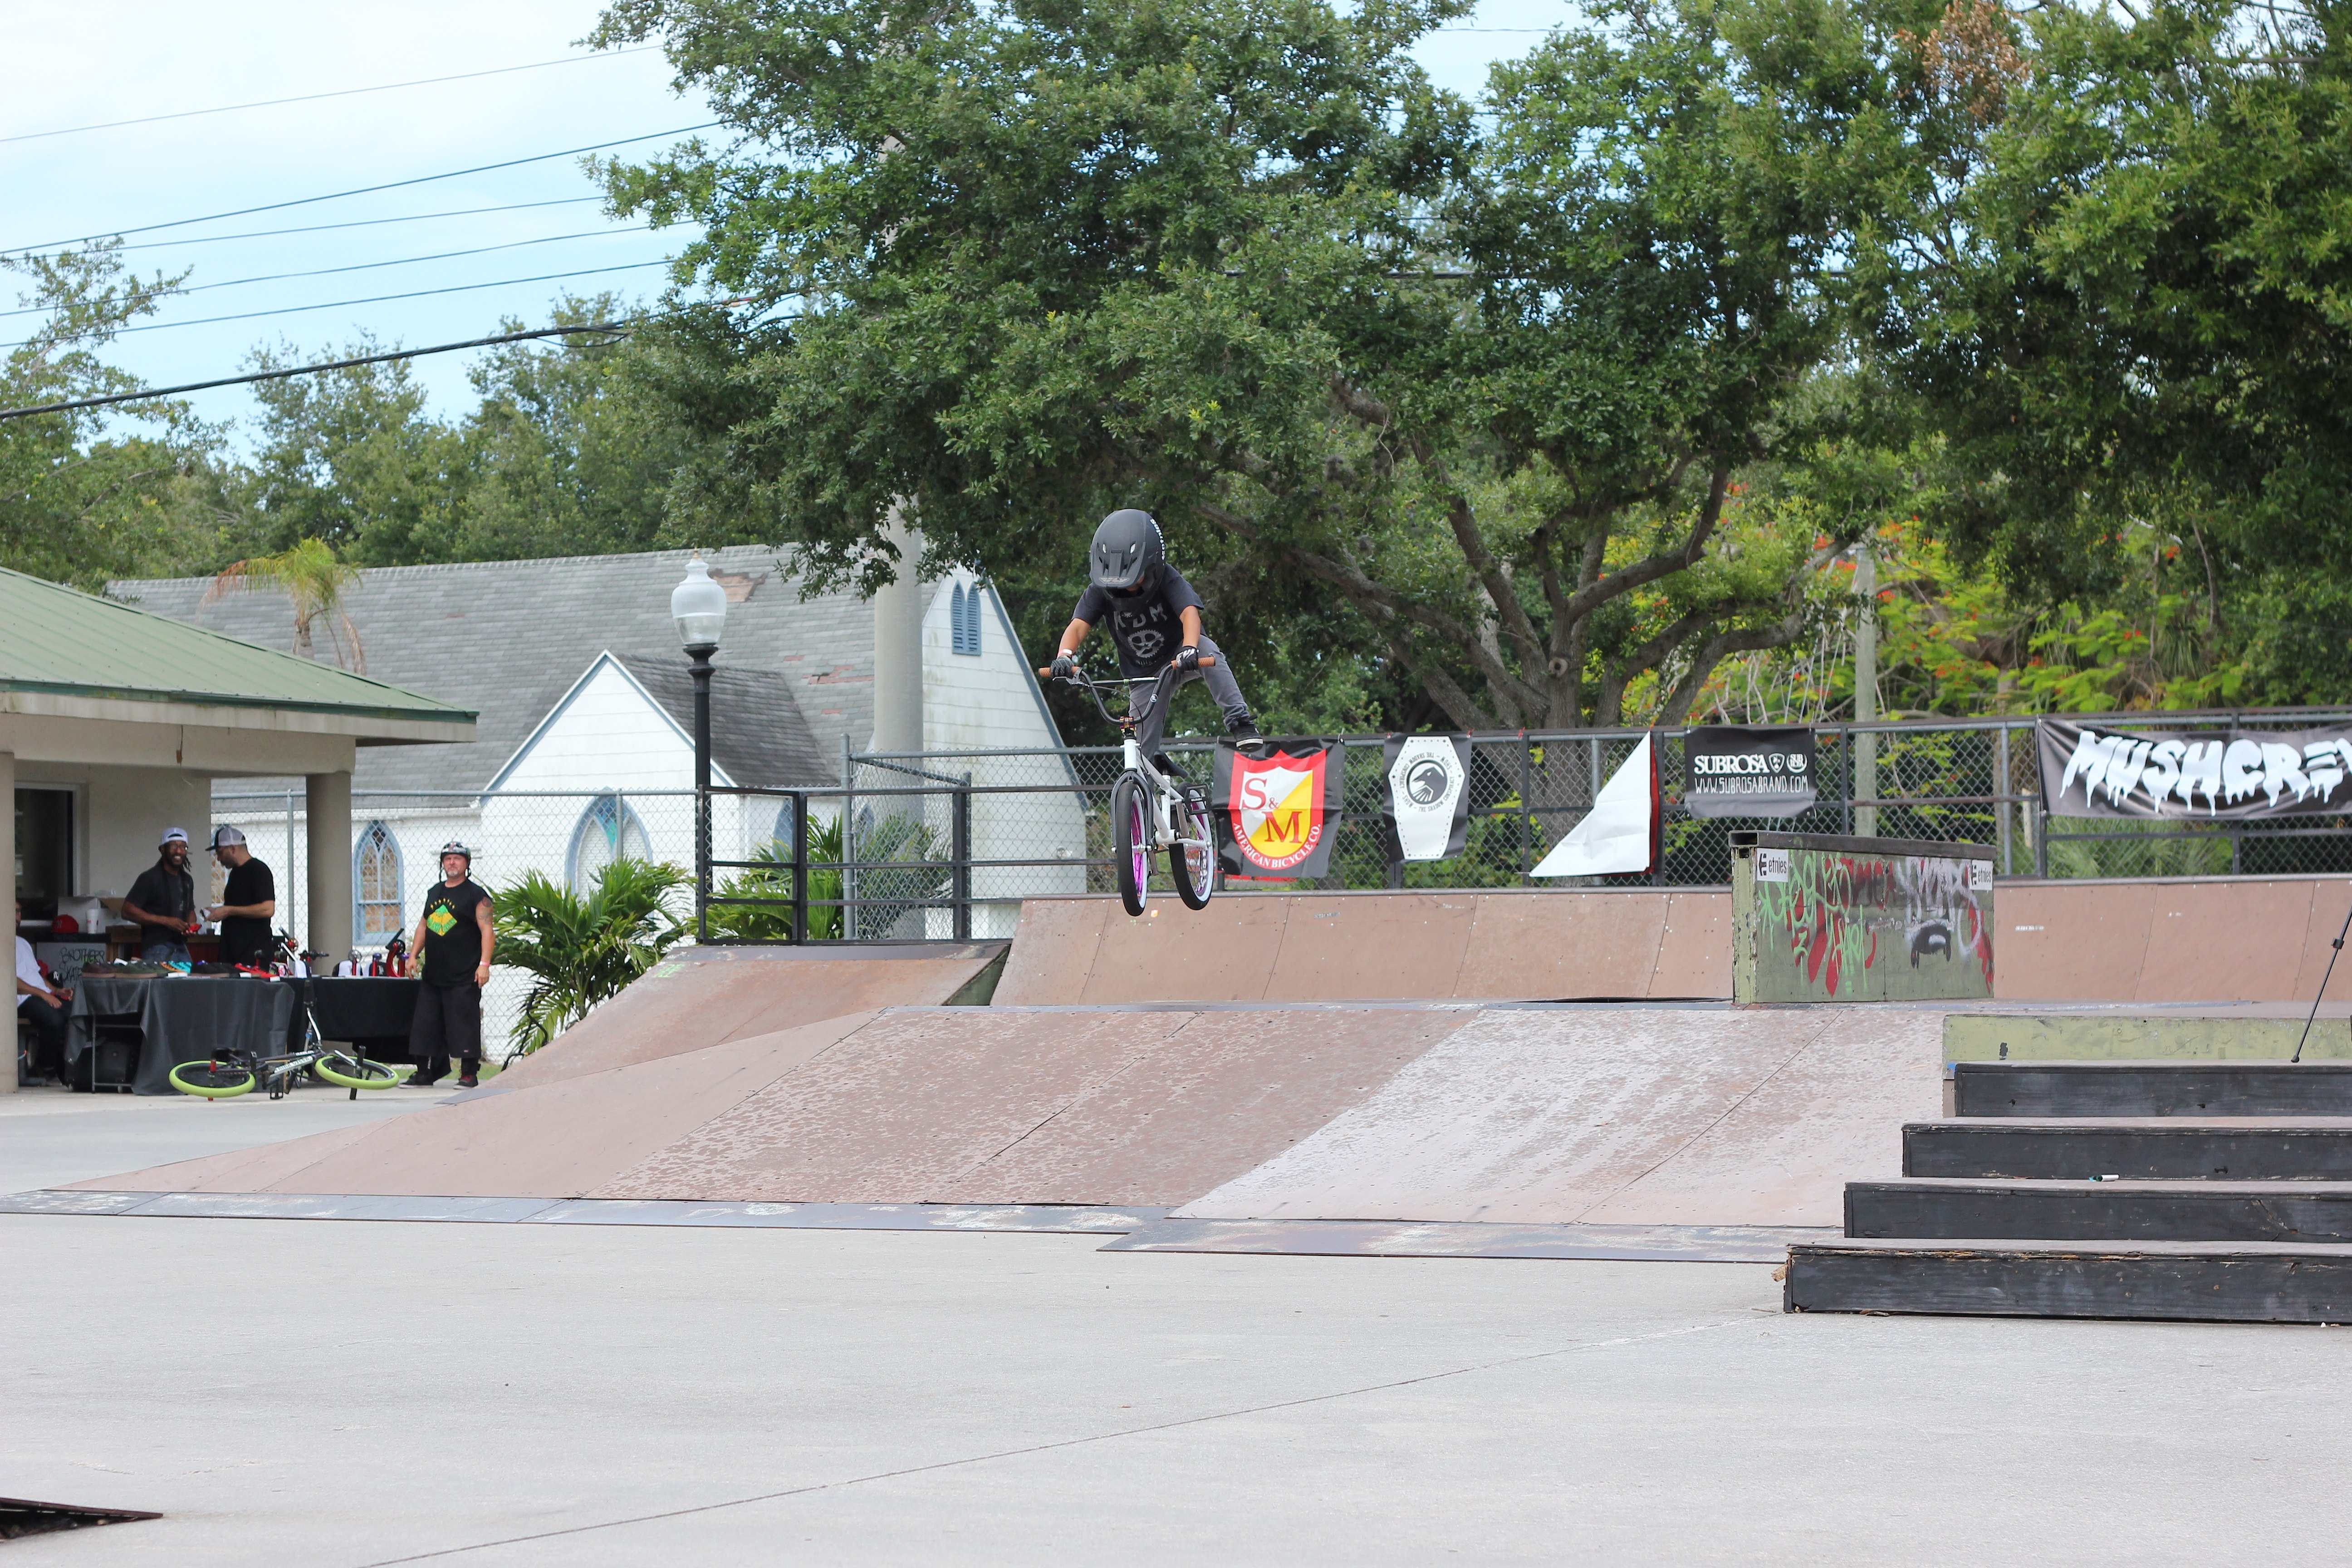 Geovanni Spado: One foot over one of the best park pyramids in Florida.